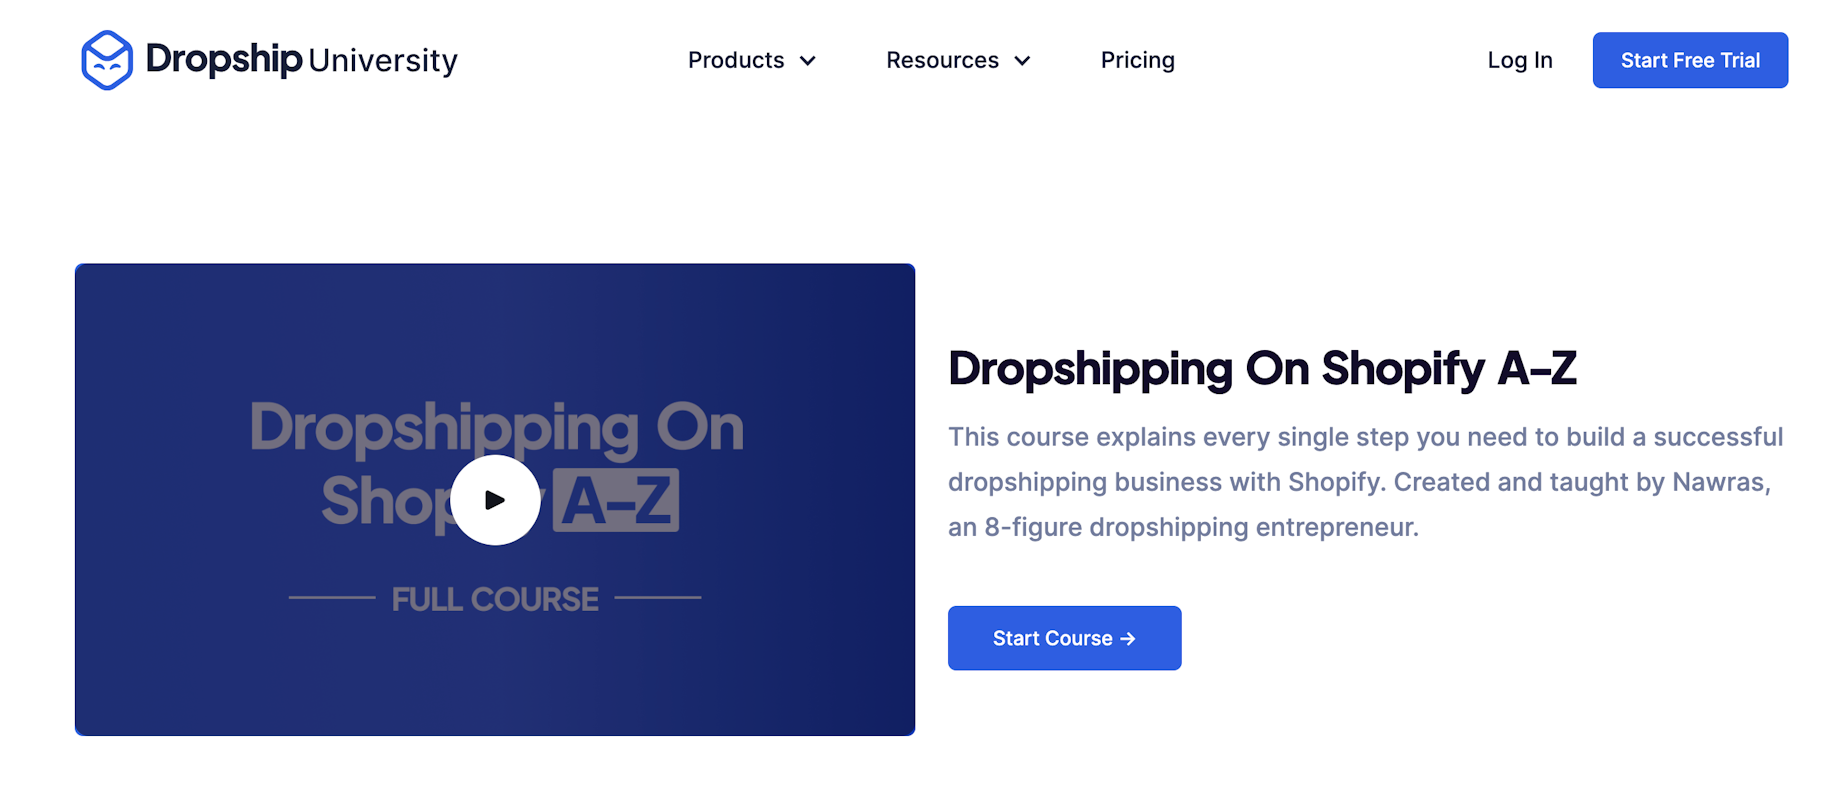 Best dropshipping course: Dropshipping On Shopify A-Z